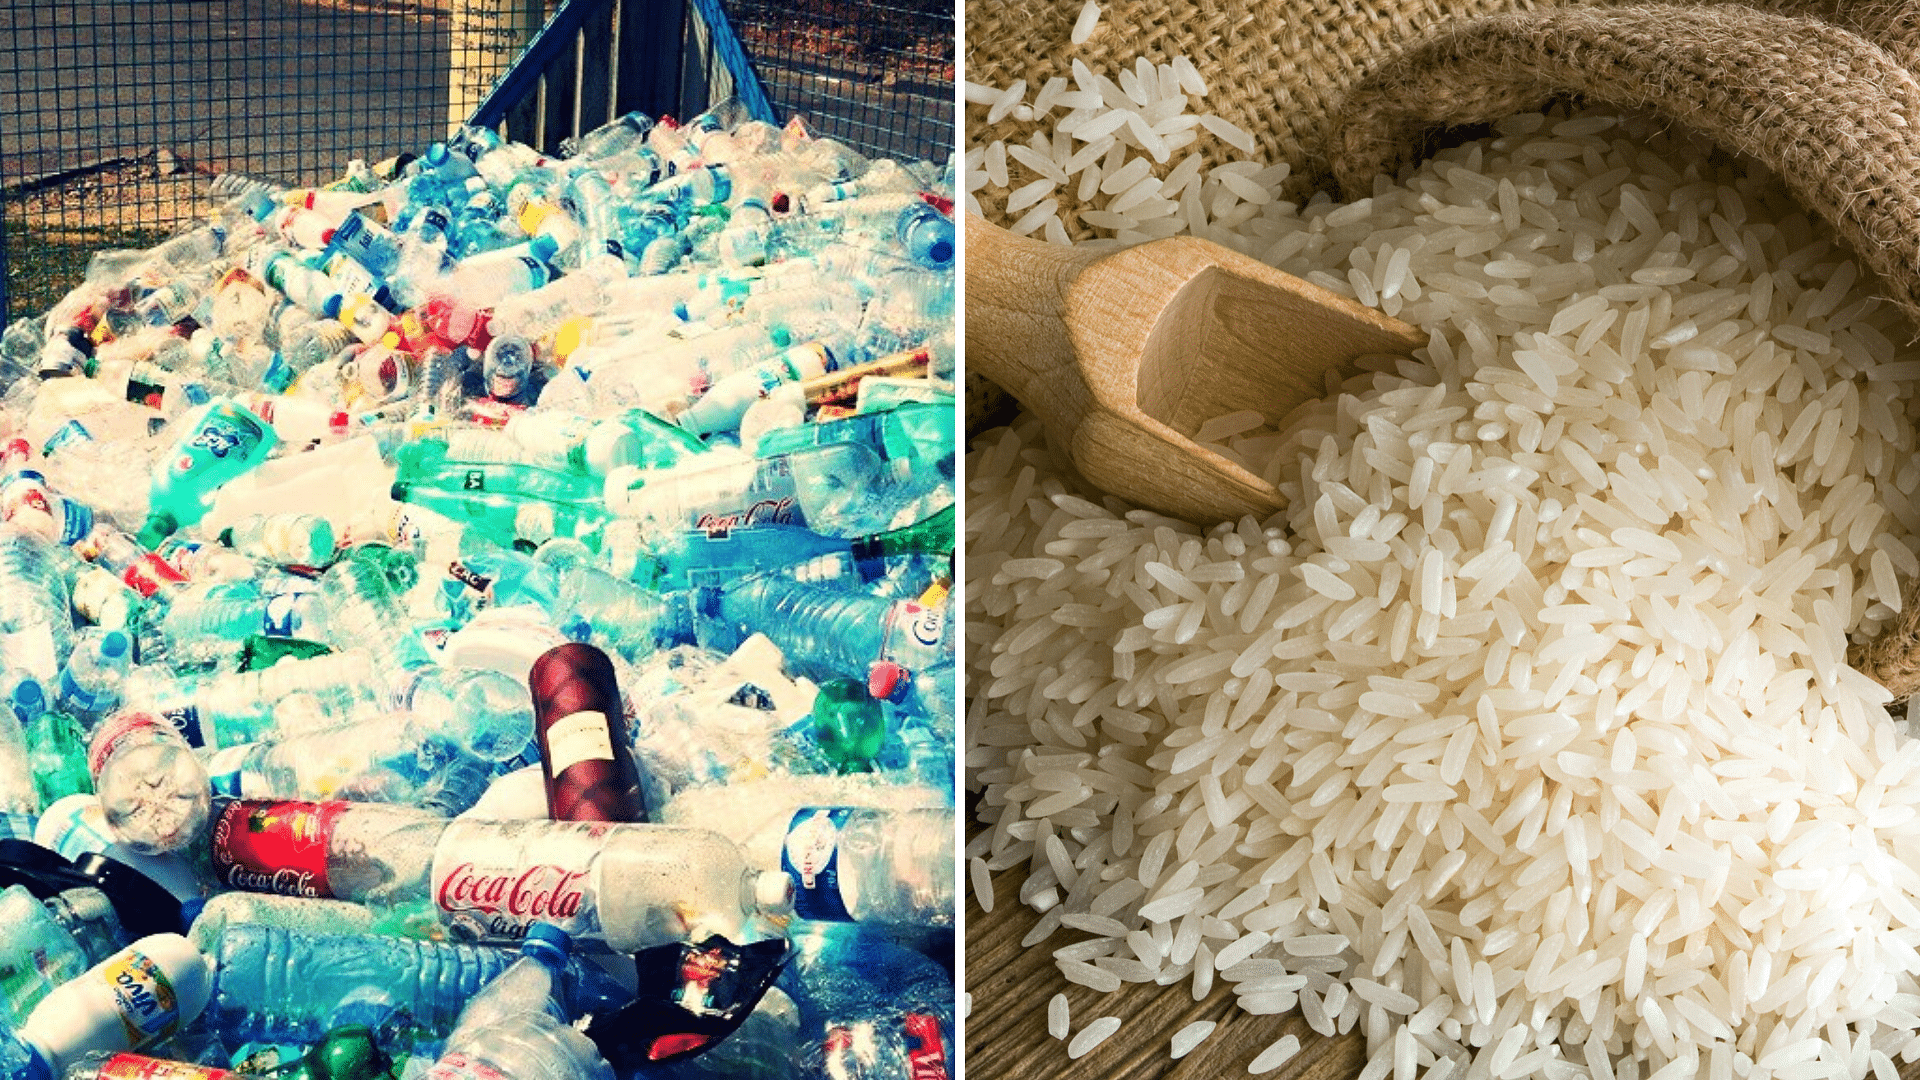 Telangana’s Mulugu district has recently launched an initiative called ‘Give 1 Kg Plastic Waste To Get 1 Kg Rice’ across 174 villages.